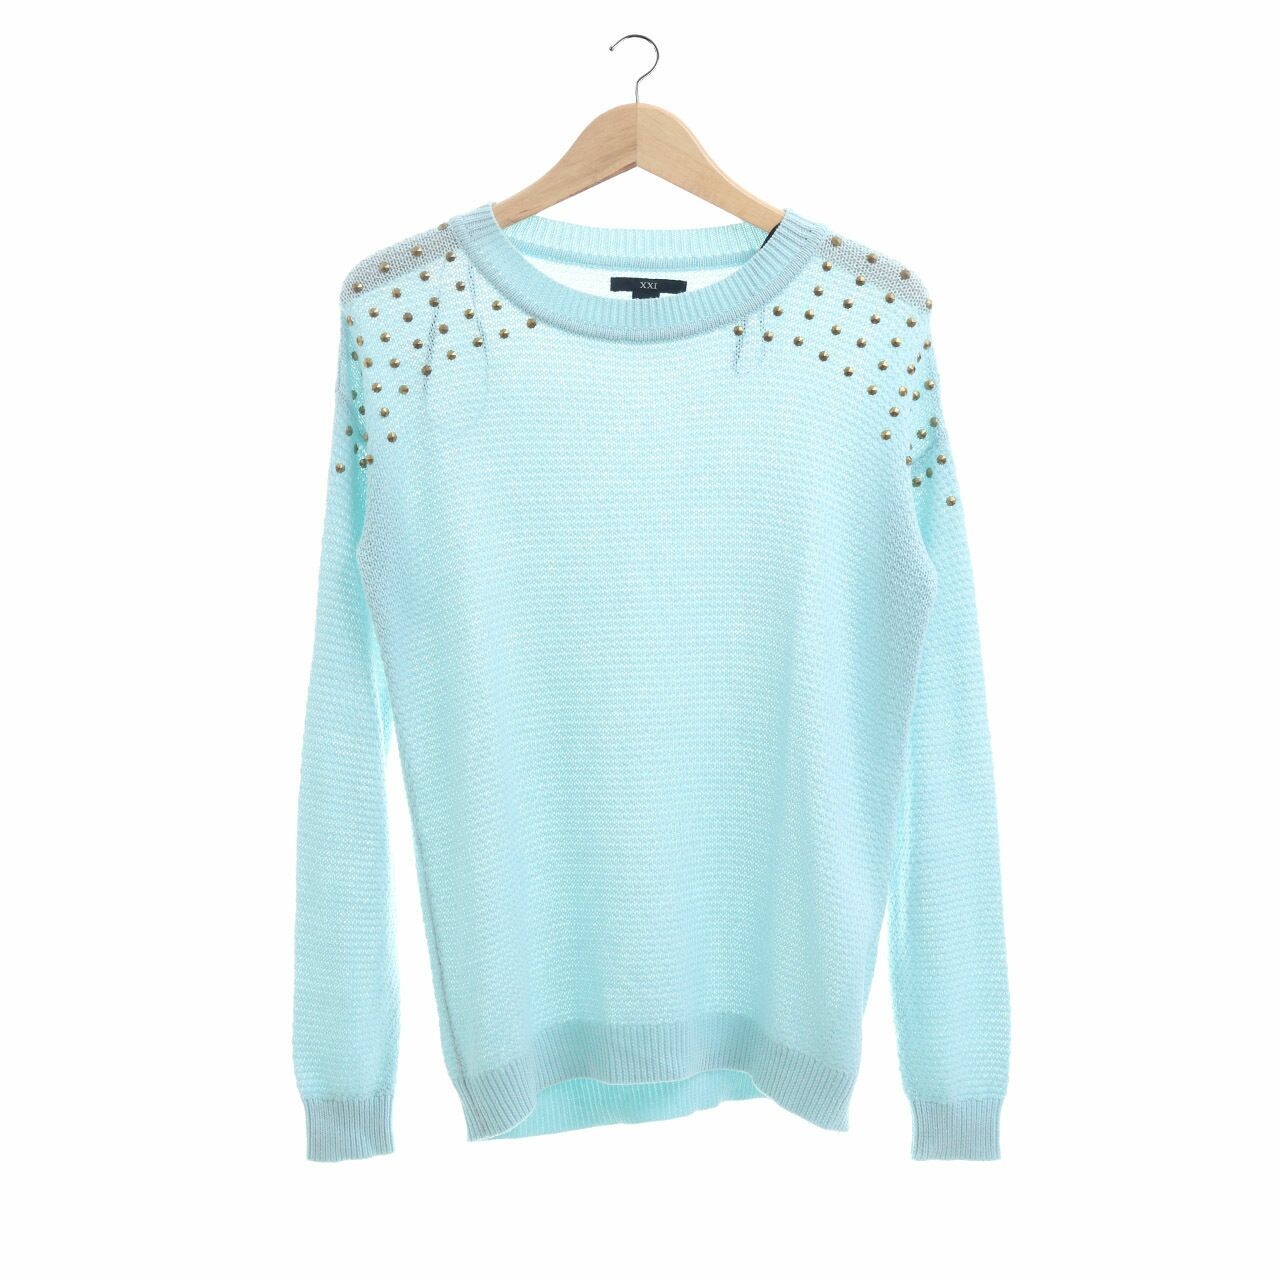 Forever 21 Mint Beaded Knit Sweater